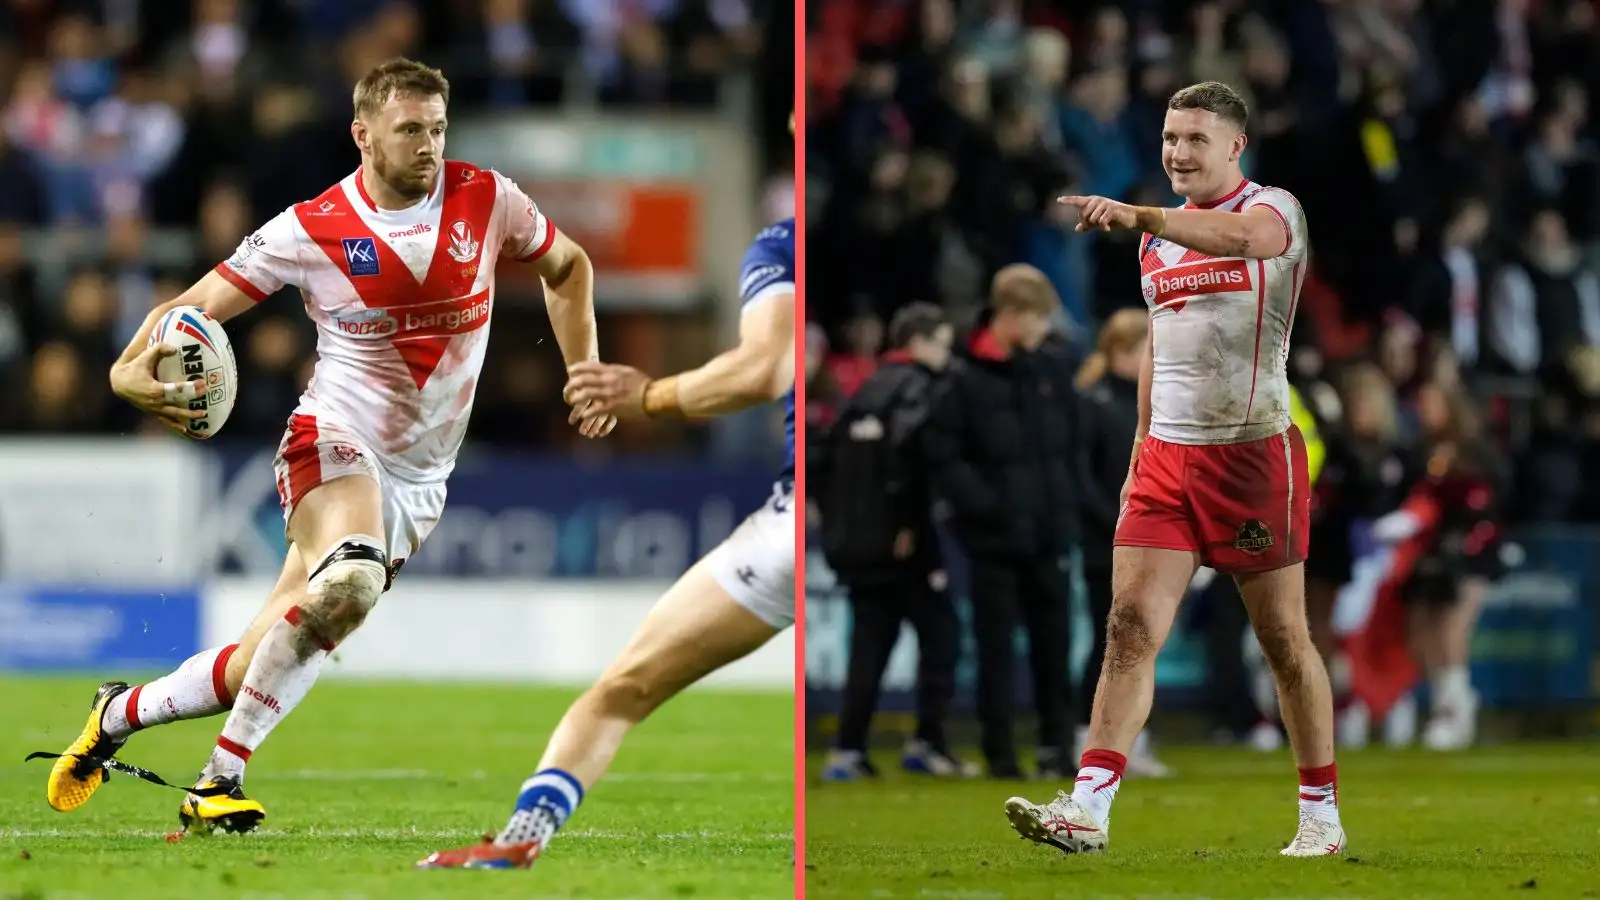 St Helens head coach Paul Wellens provides injury update on forward duo